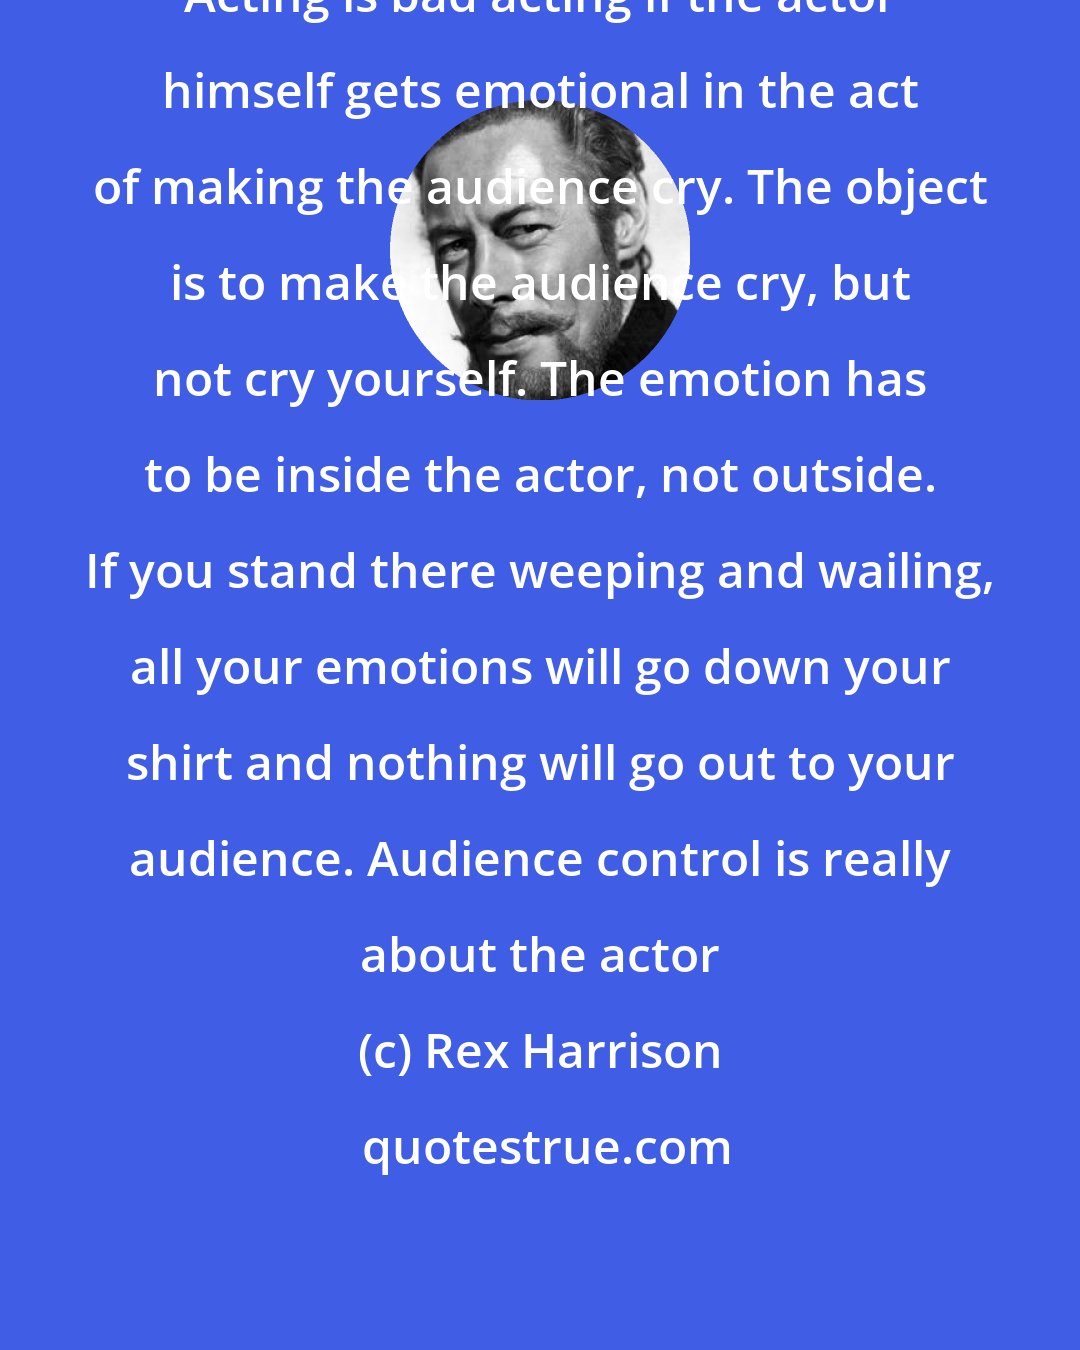 Rex Harrison: Acting is bad acting if the actor himself gets emotional in the act of making the audience cry. The object is to make the audience cry, but not cry yourself. The emotion has to be inside the actor, not outside. If you stand there weeping and wailing, all your emotions will go down your shirt and nothing will go out to your audience. Audience control is really about the actor